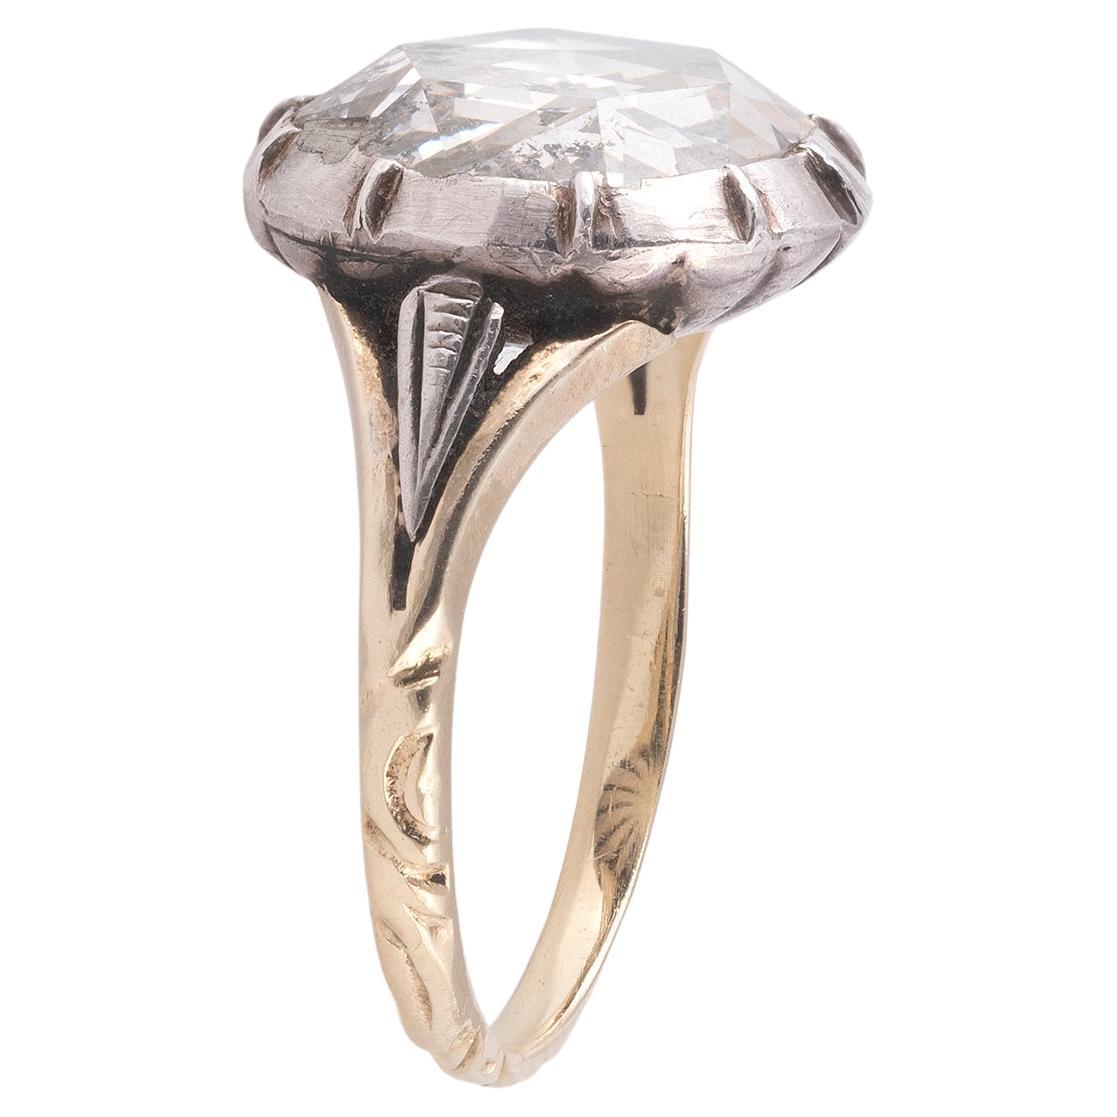 The round-shaped rose-cut diamond in silver and gold closed-back setting and engraved gold shank.
Rose cut (d. 10.5 mm). Weight 3,3g.
Size: 6 1/2